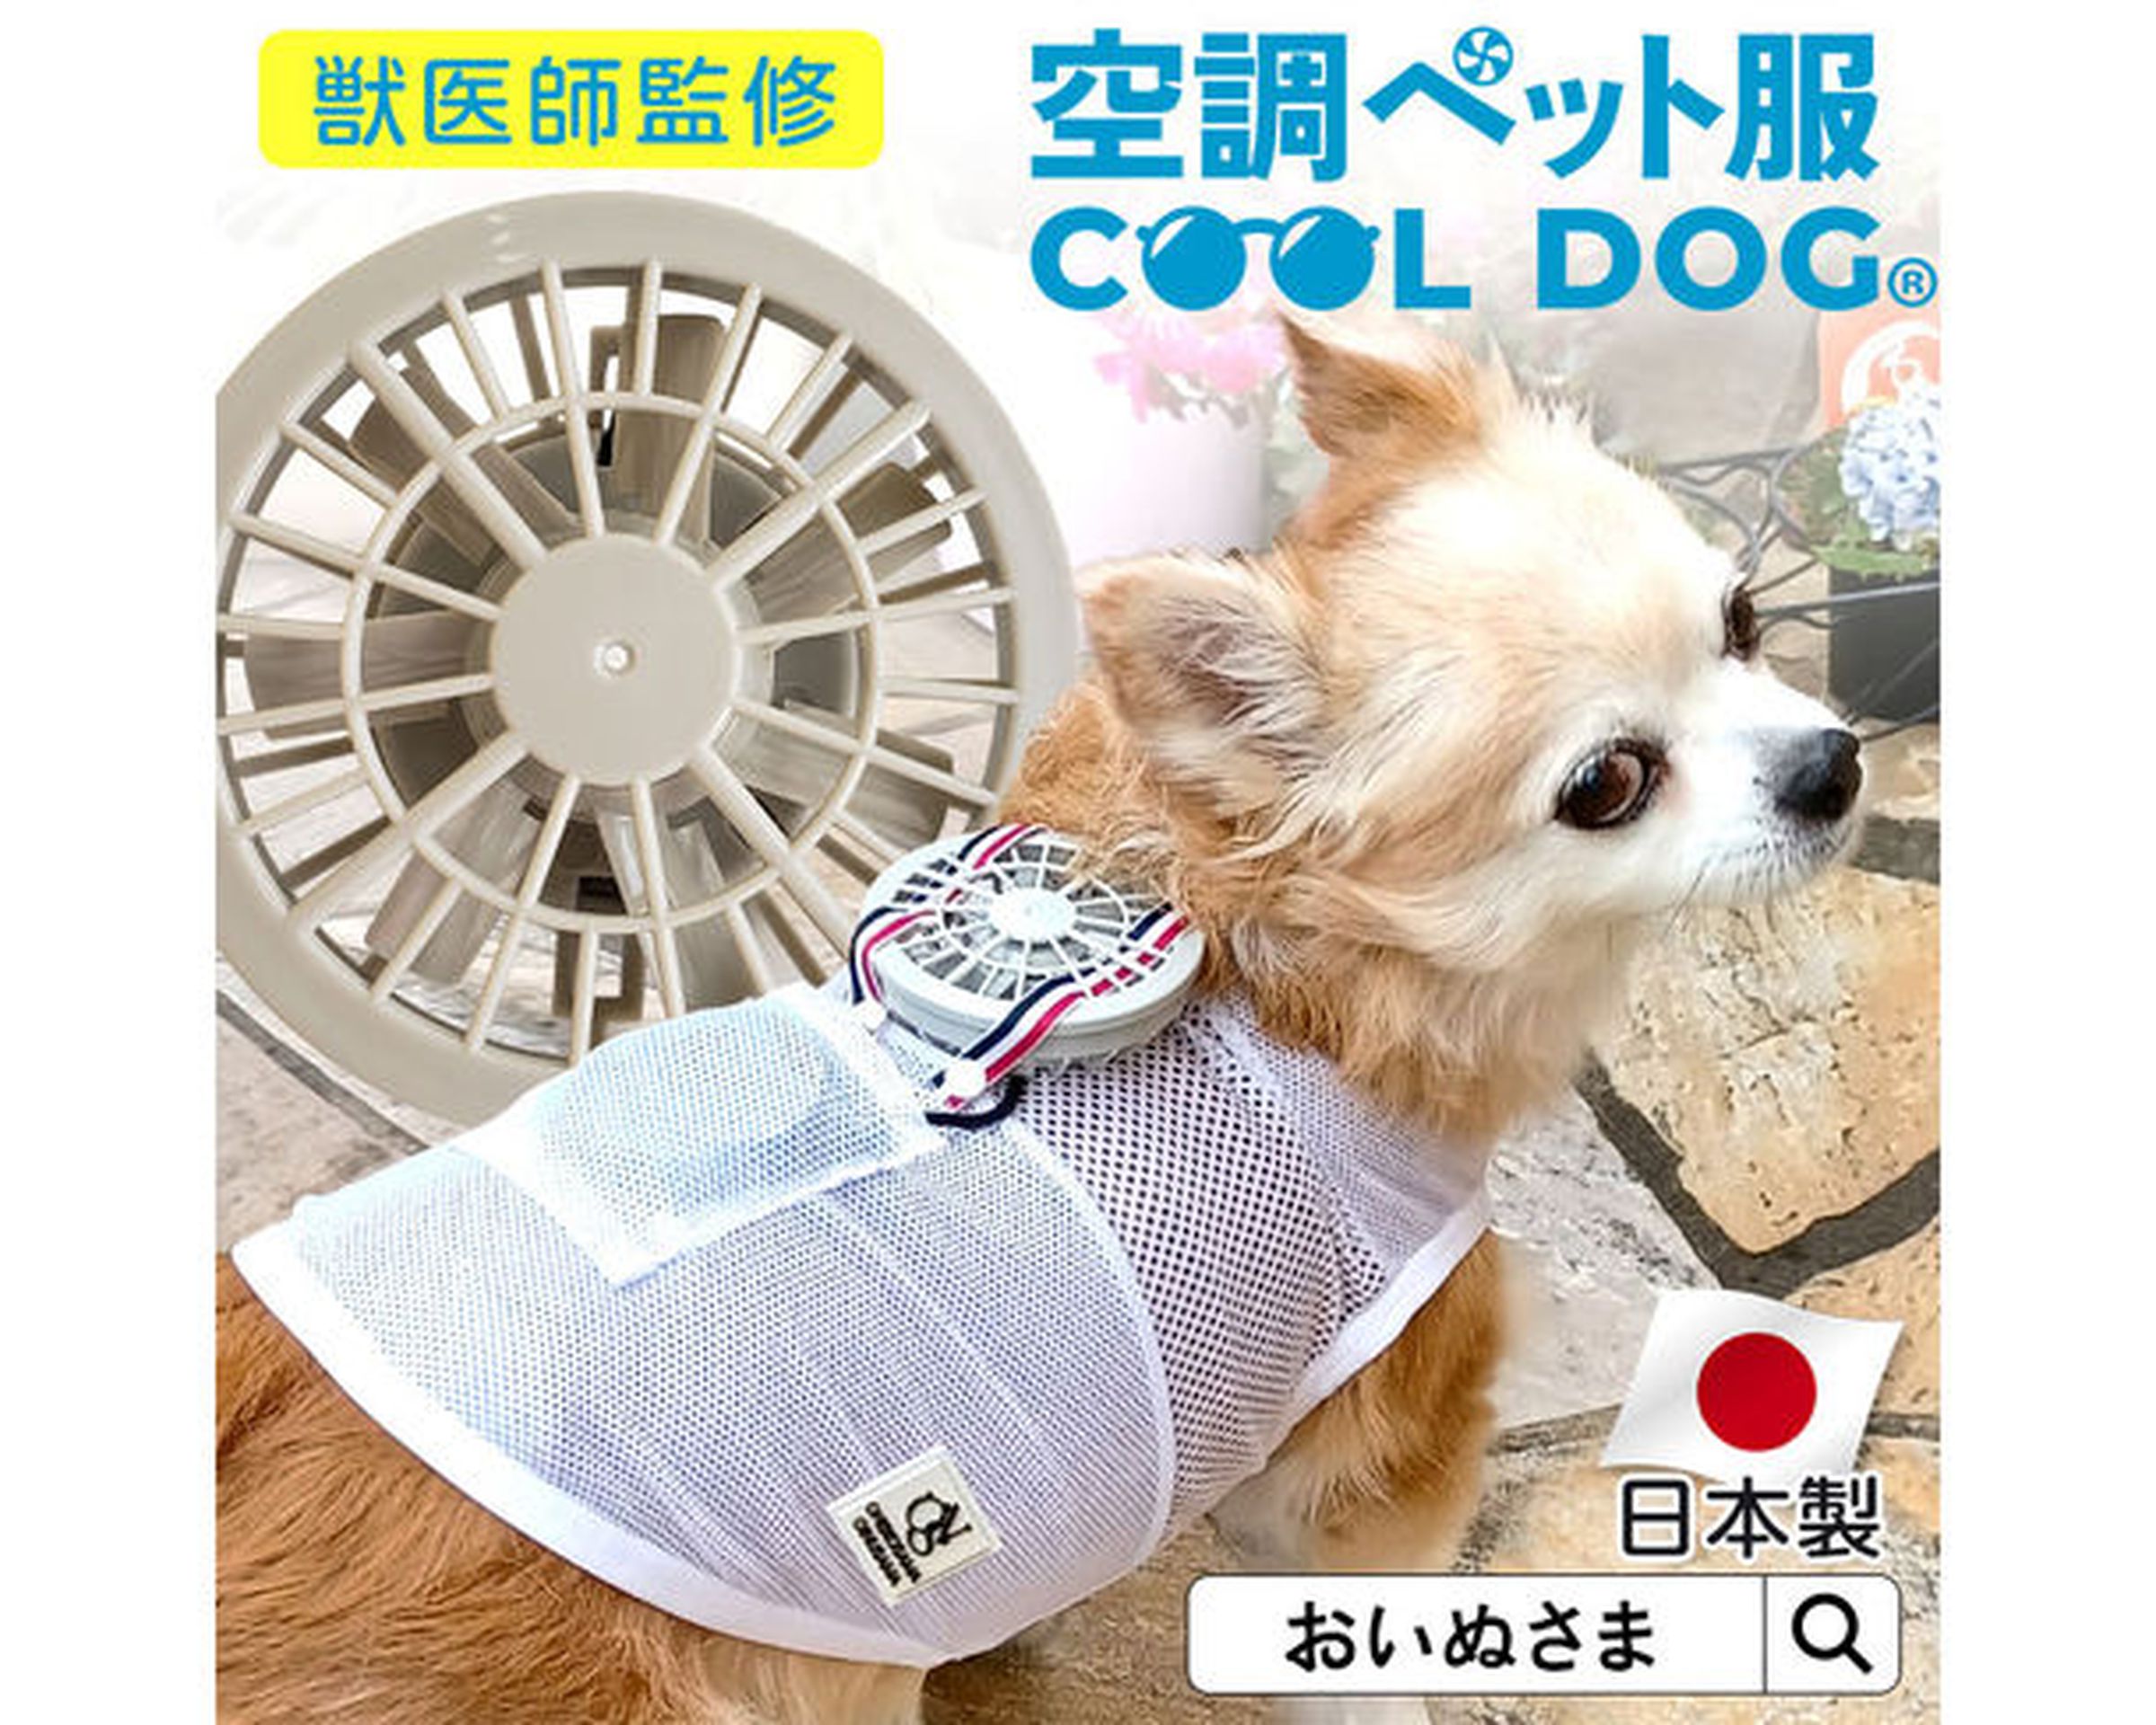 A small dog wearing a shirt with a fan attached to the back